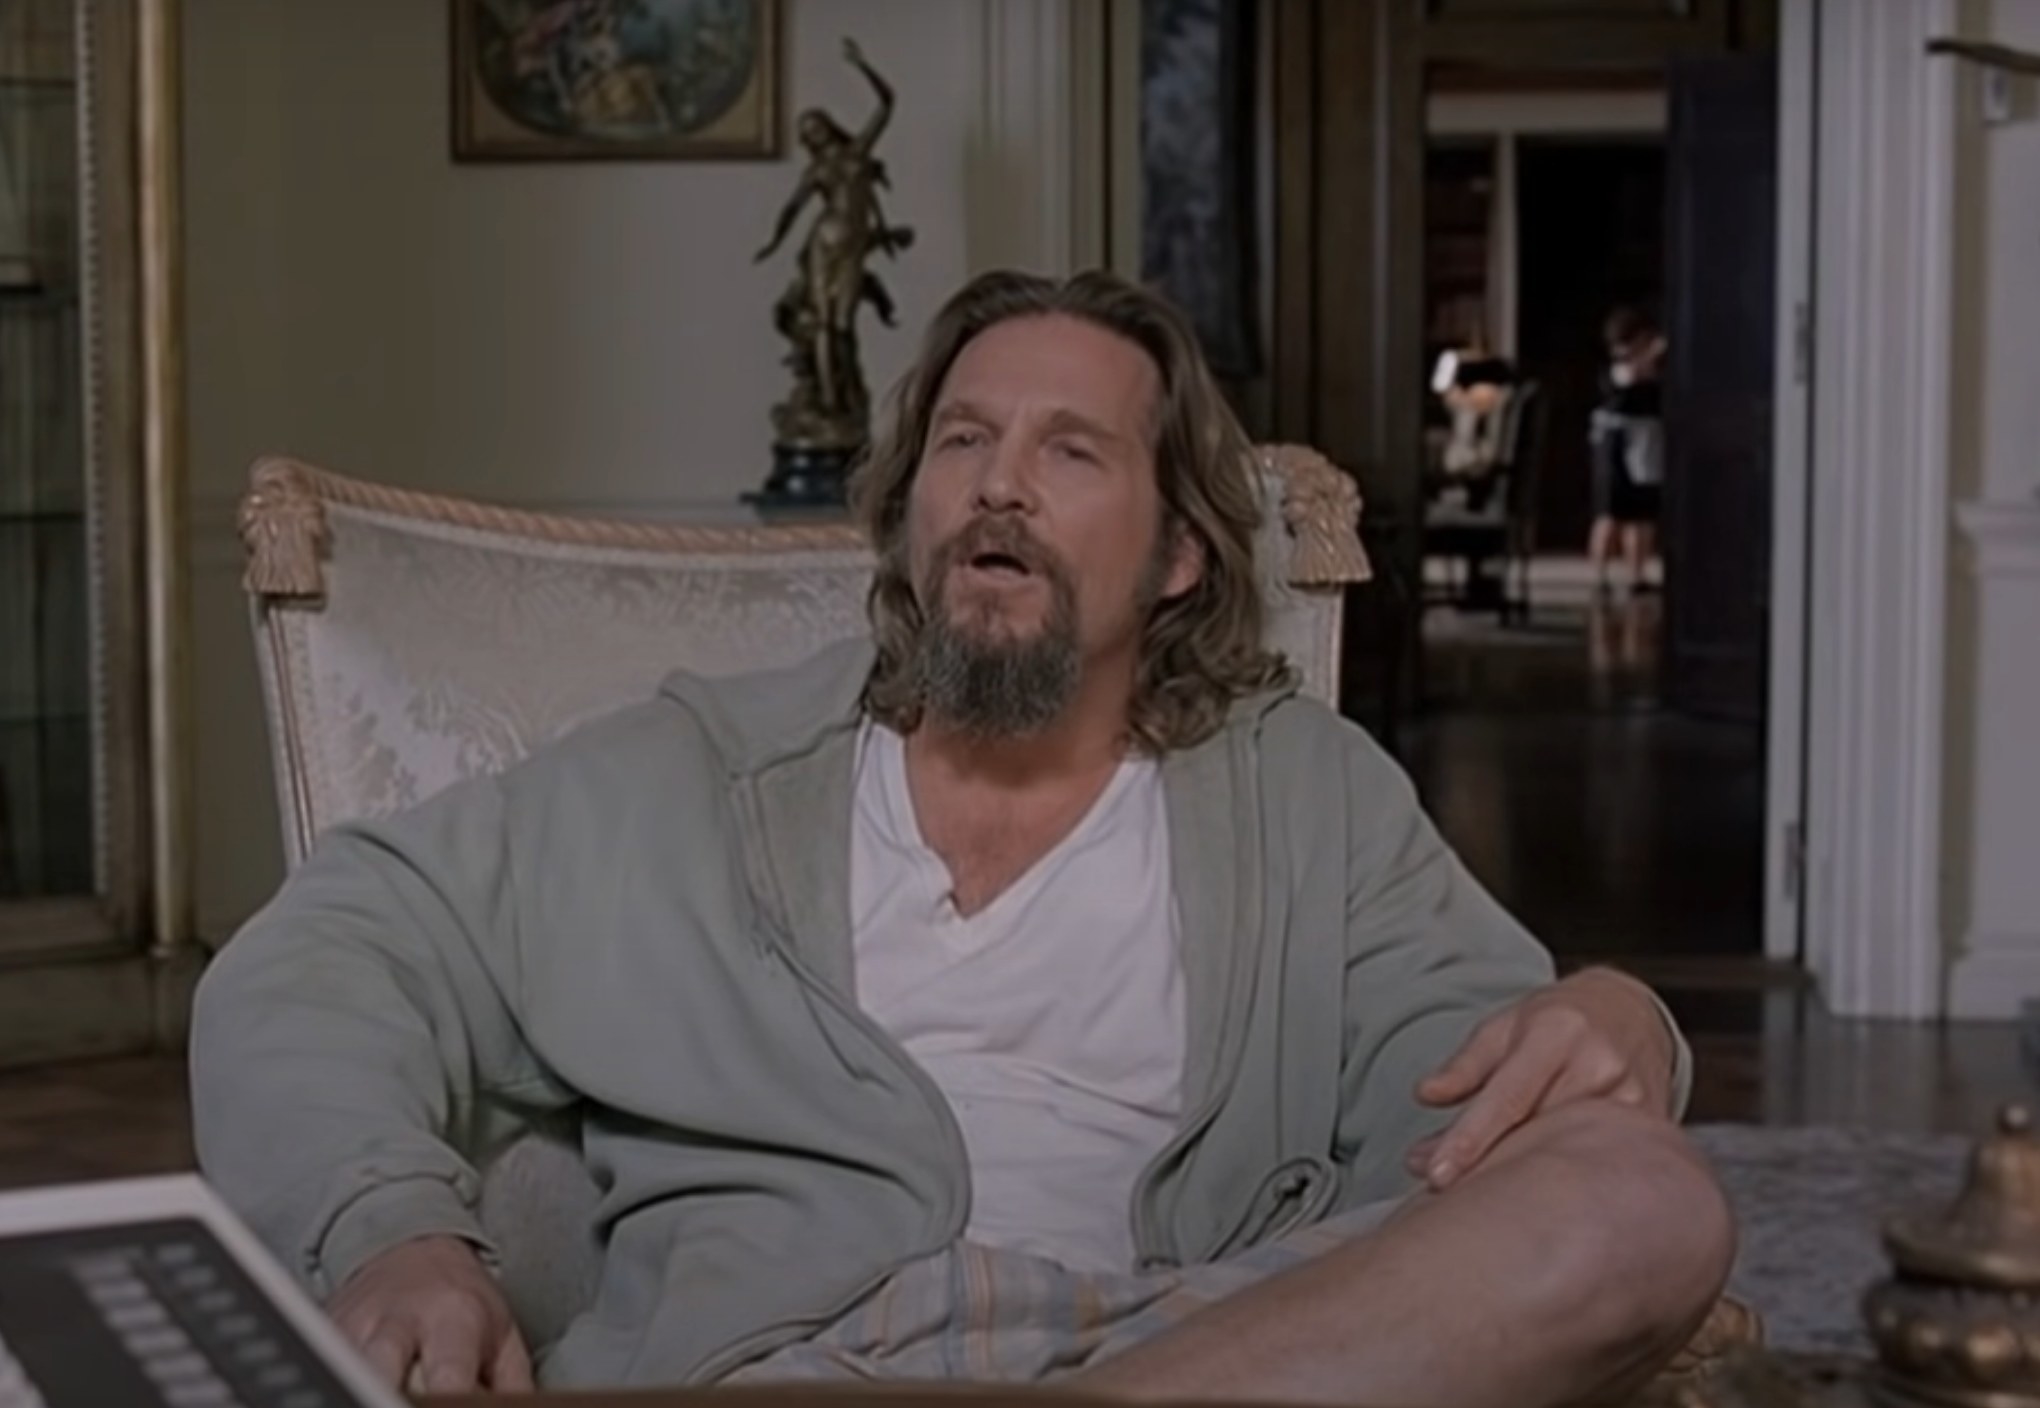 The Dude talks to Jeffrey Lebowski at his home